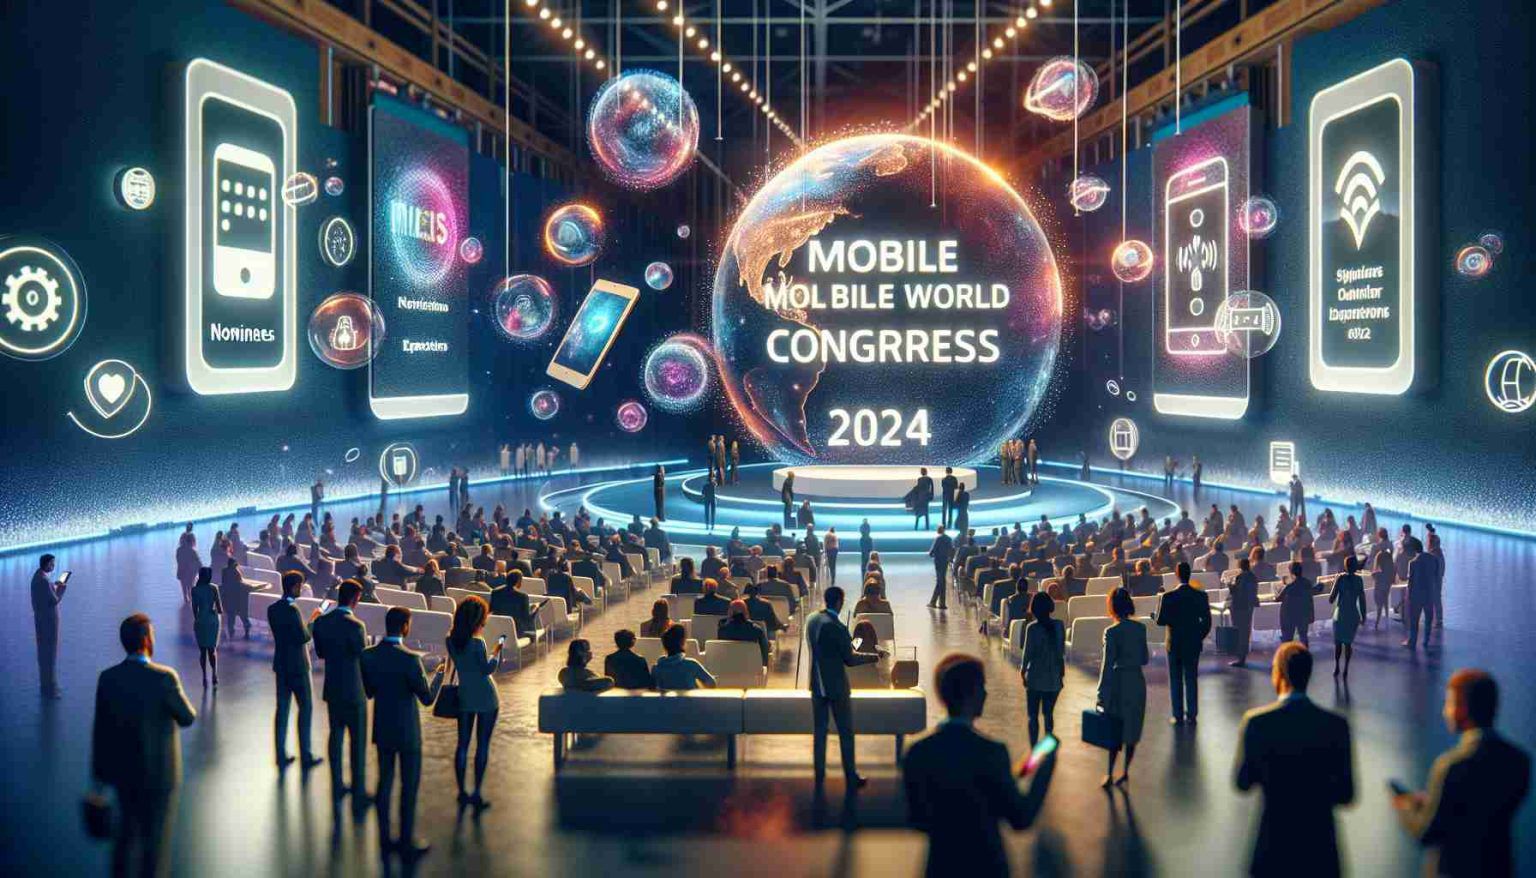 What to Expect at MWC 2024